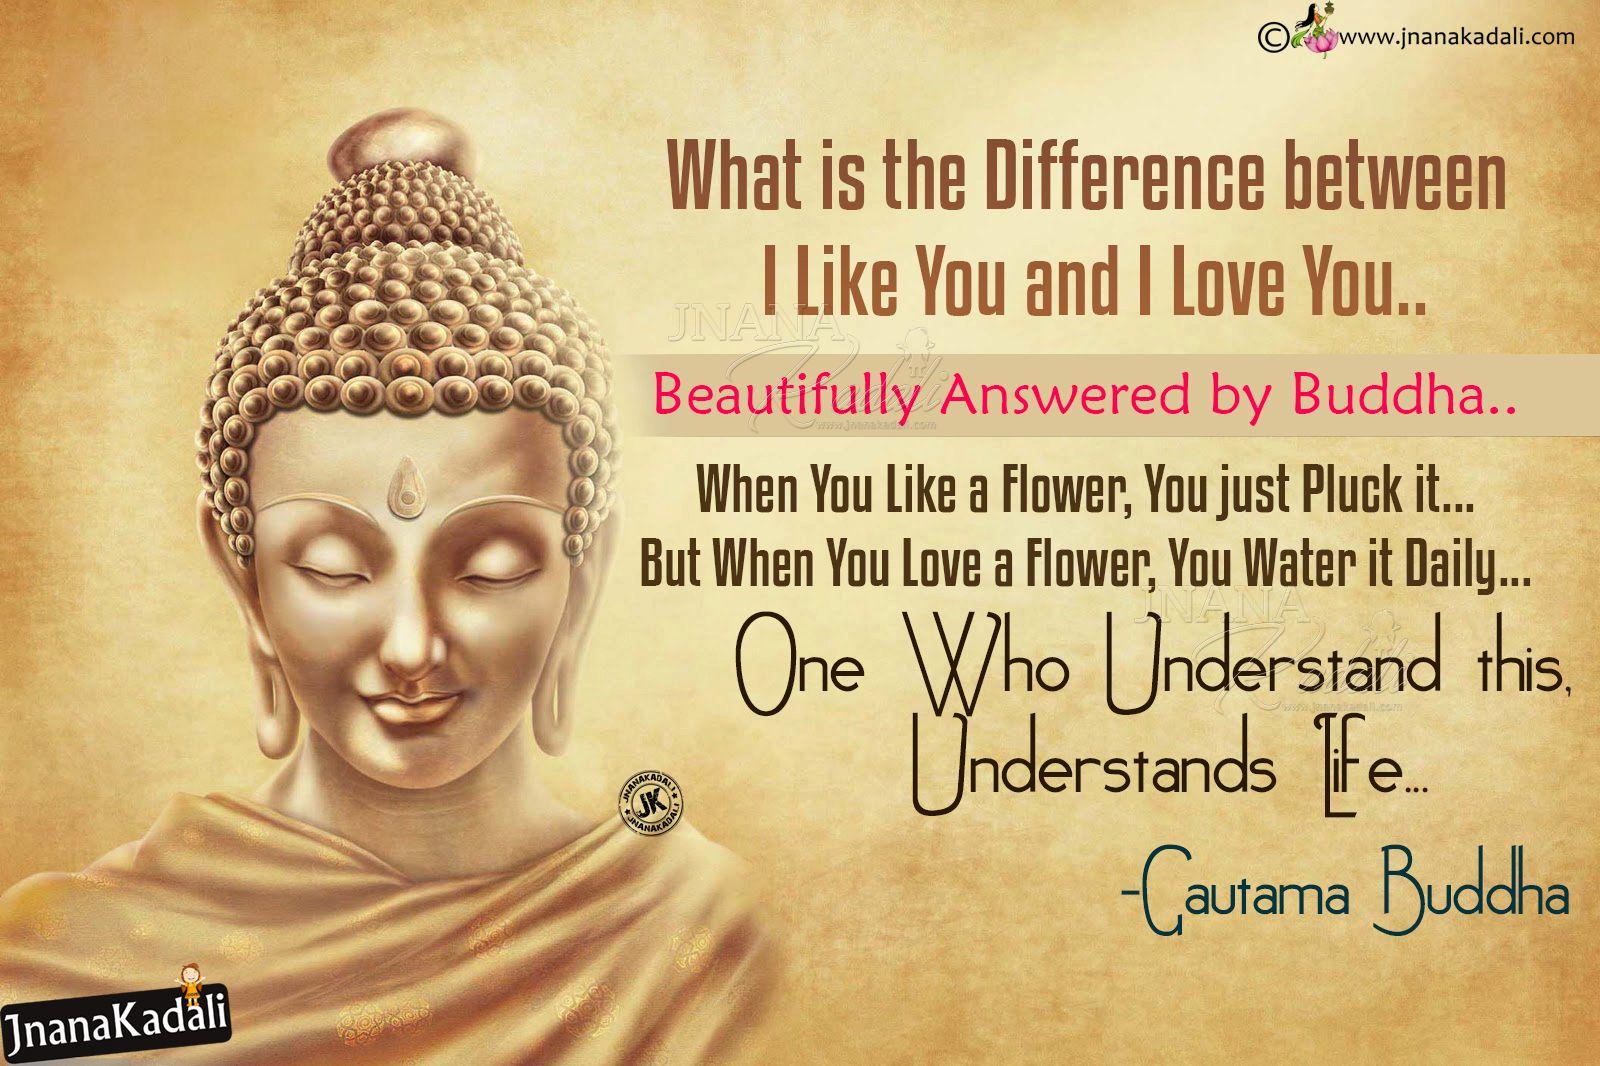 Buddha Love Quotes. QUOTES OF THE DAY